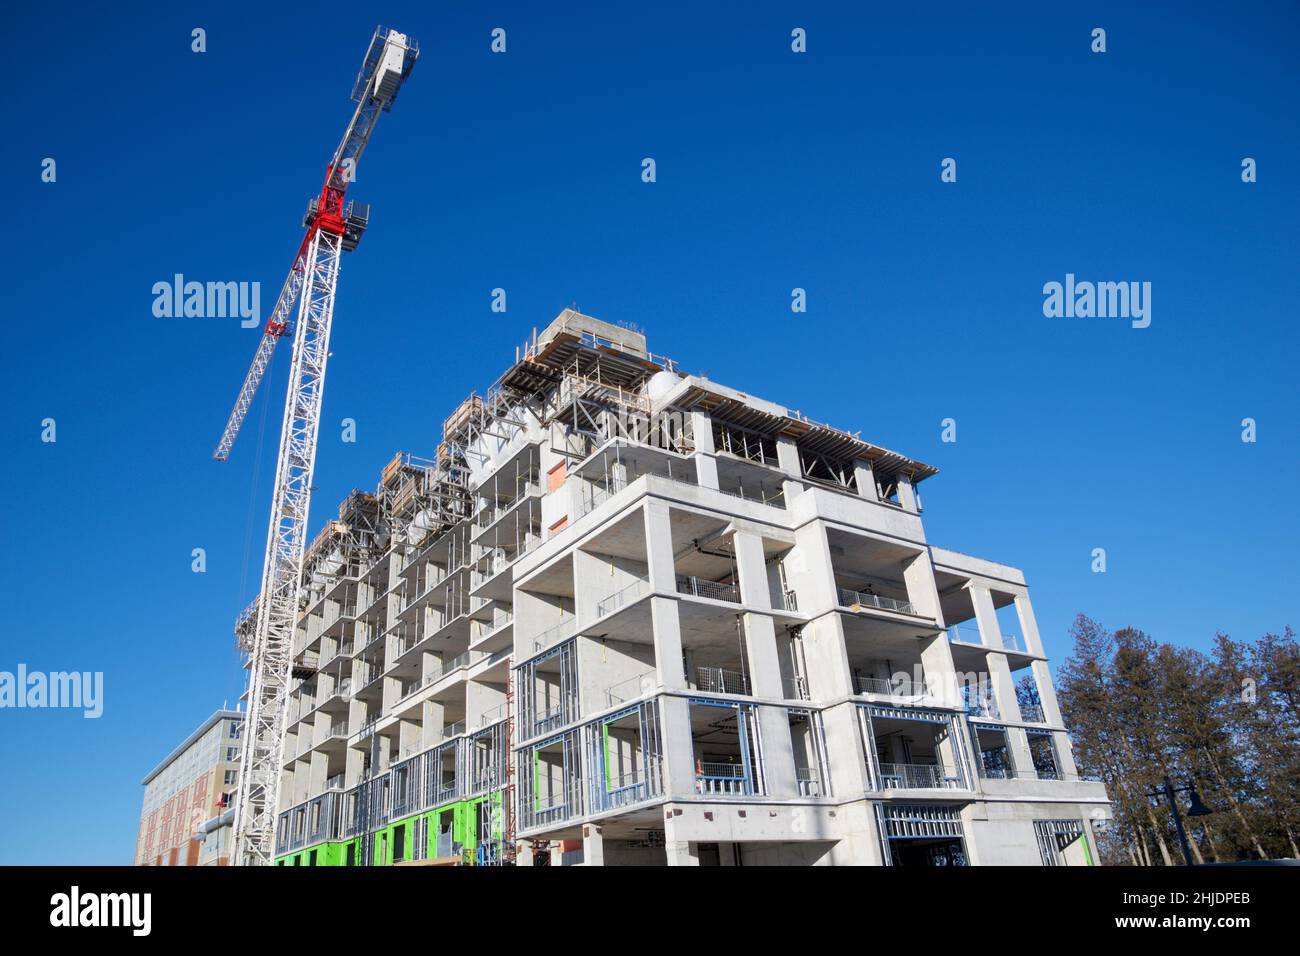 Crane and building construction site with blue sky background Stock Photo